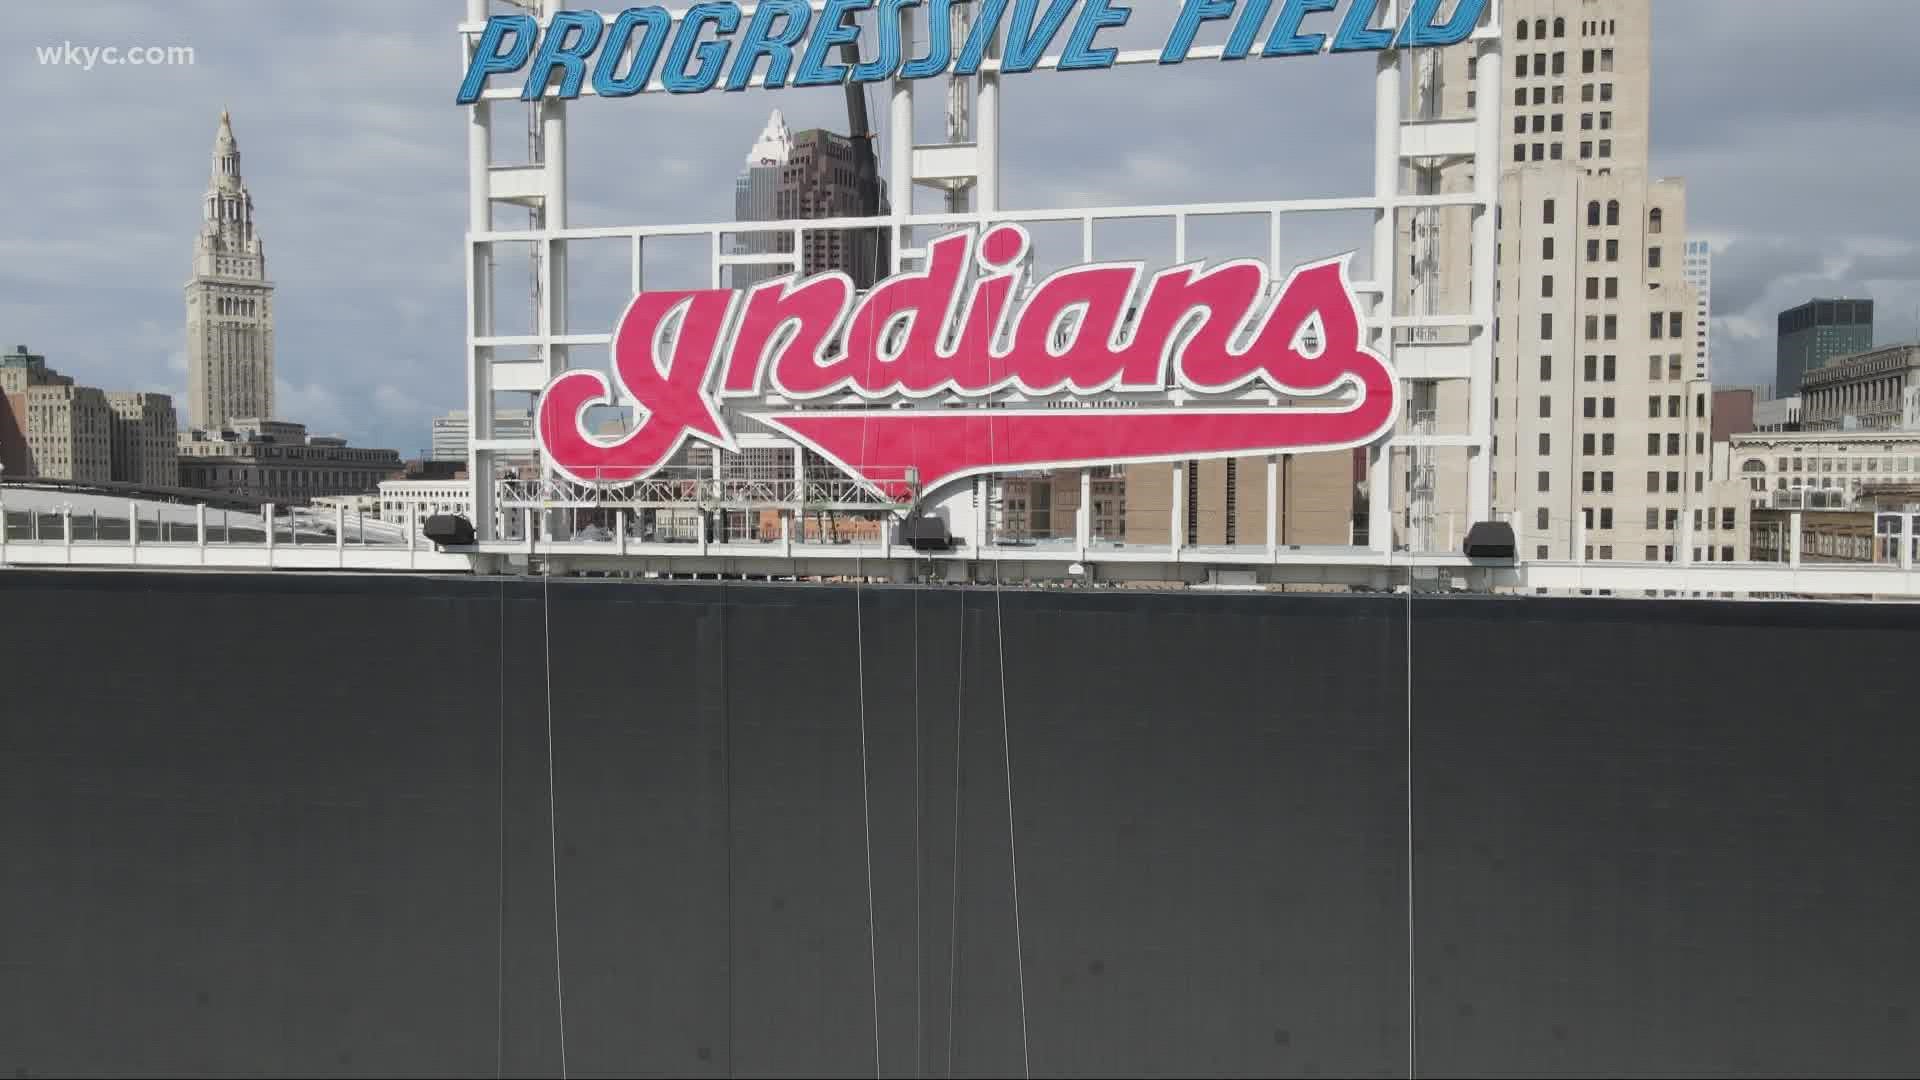 The Cleveland Indians sign is coming down. The move officially marks to the start of a new era.